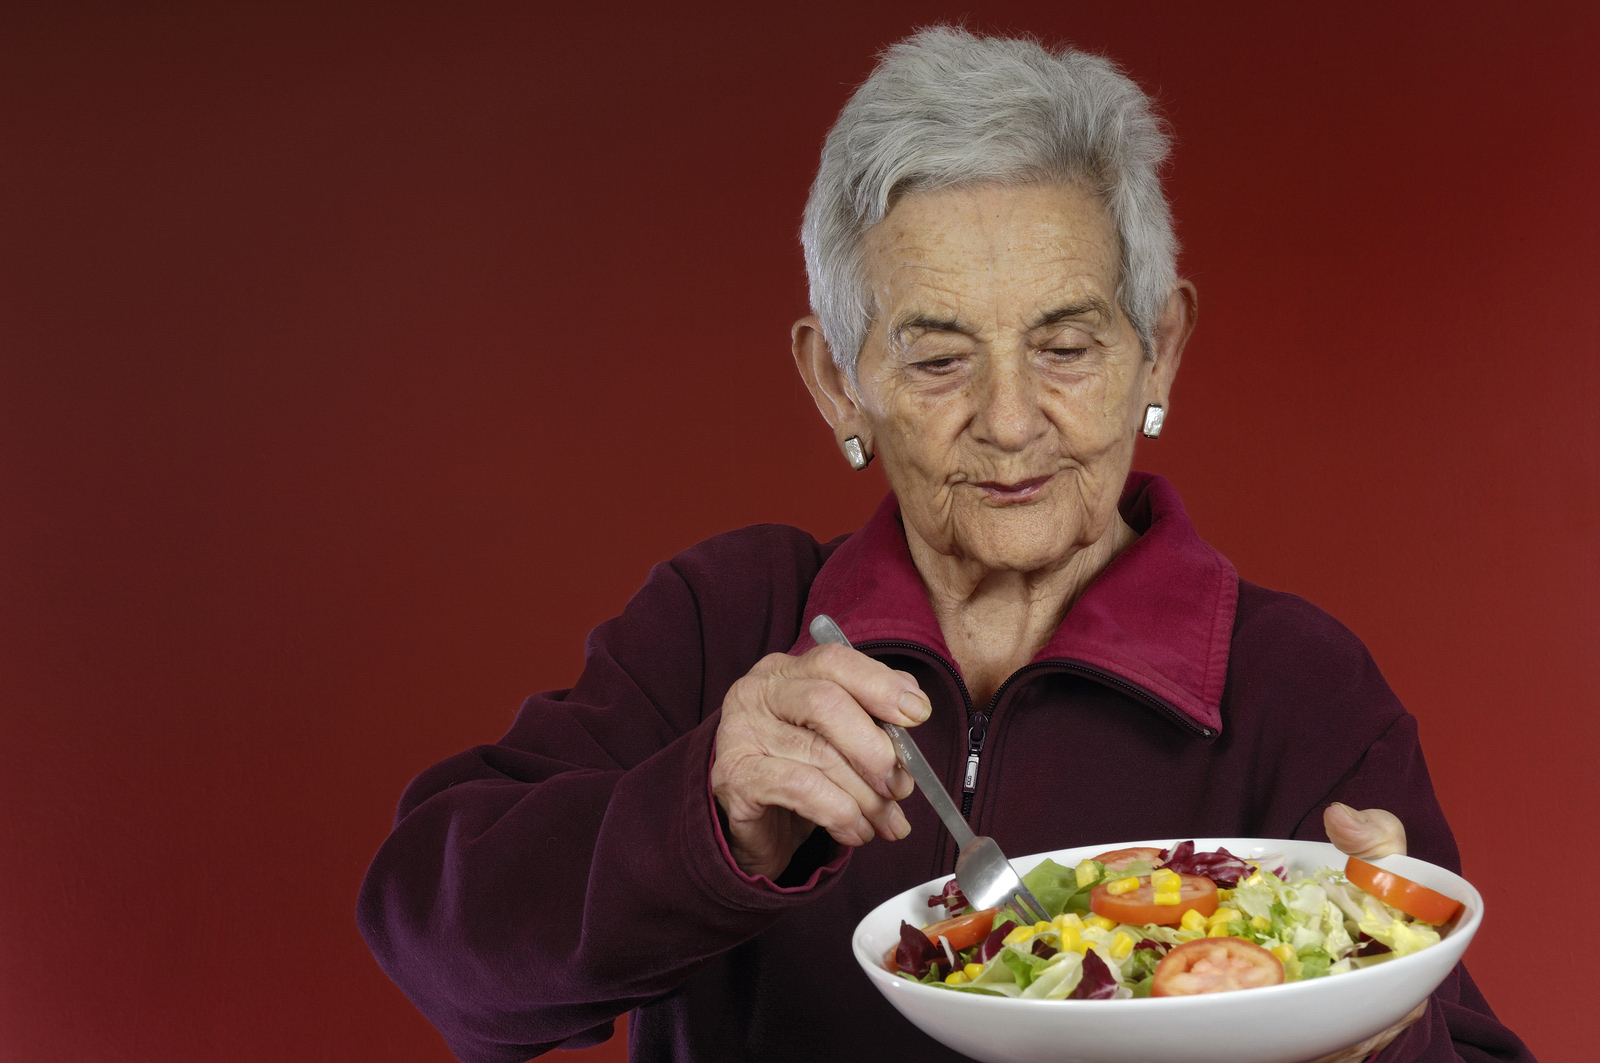 Community approaches to food security for seniors